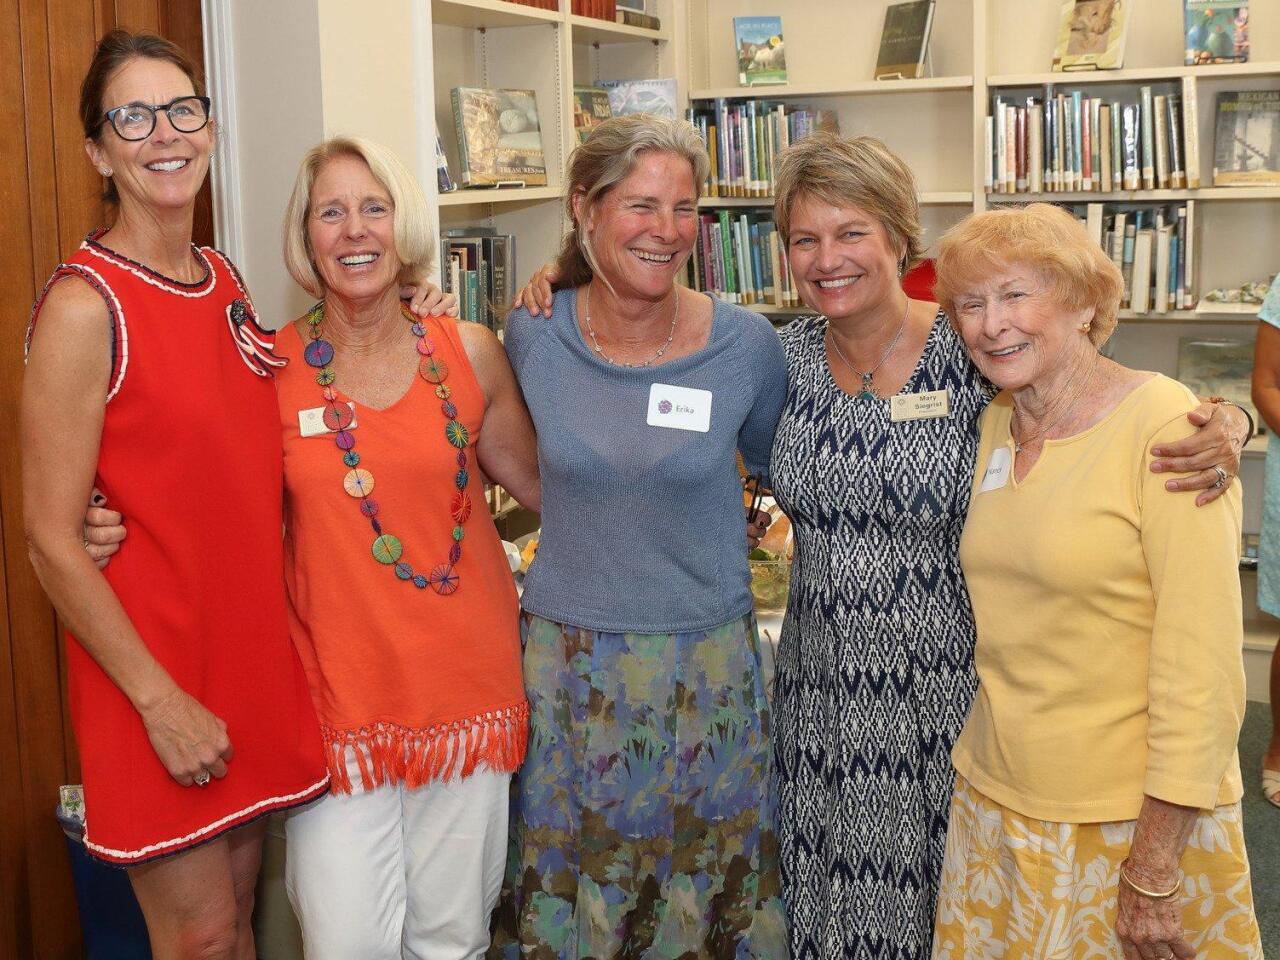 The Library Guild of RSF board members in attendance were Deana Ingalls, Kathy Stumm, Erika Desjardins, Mary Siegrist, and Nancy Miller